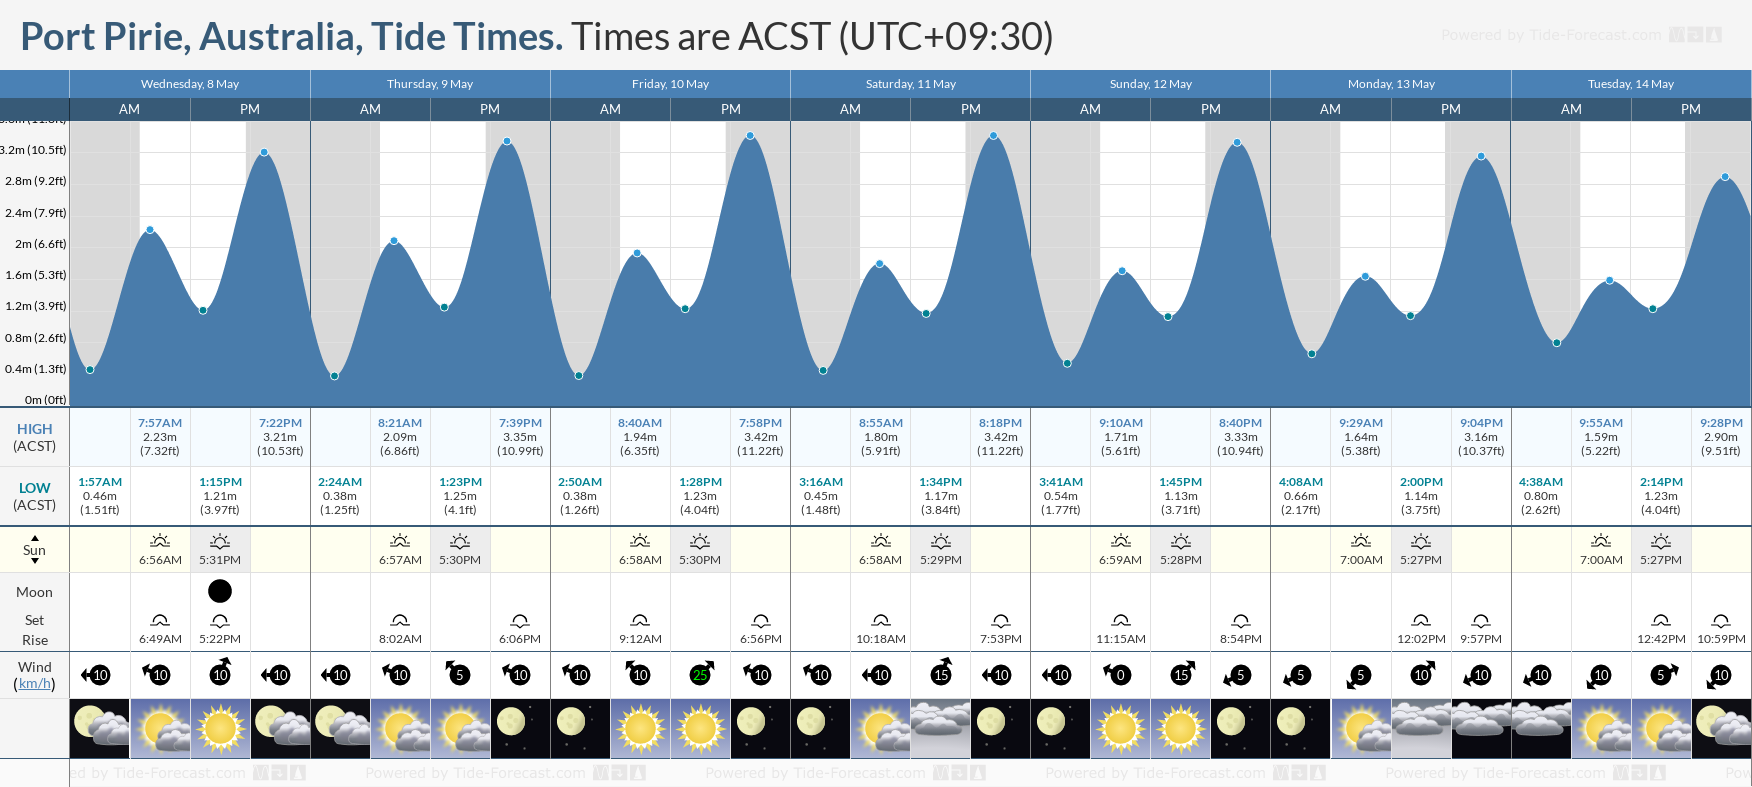 Port Pirie, Australia Tide Chart including high and low tide times for the next 7 days